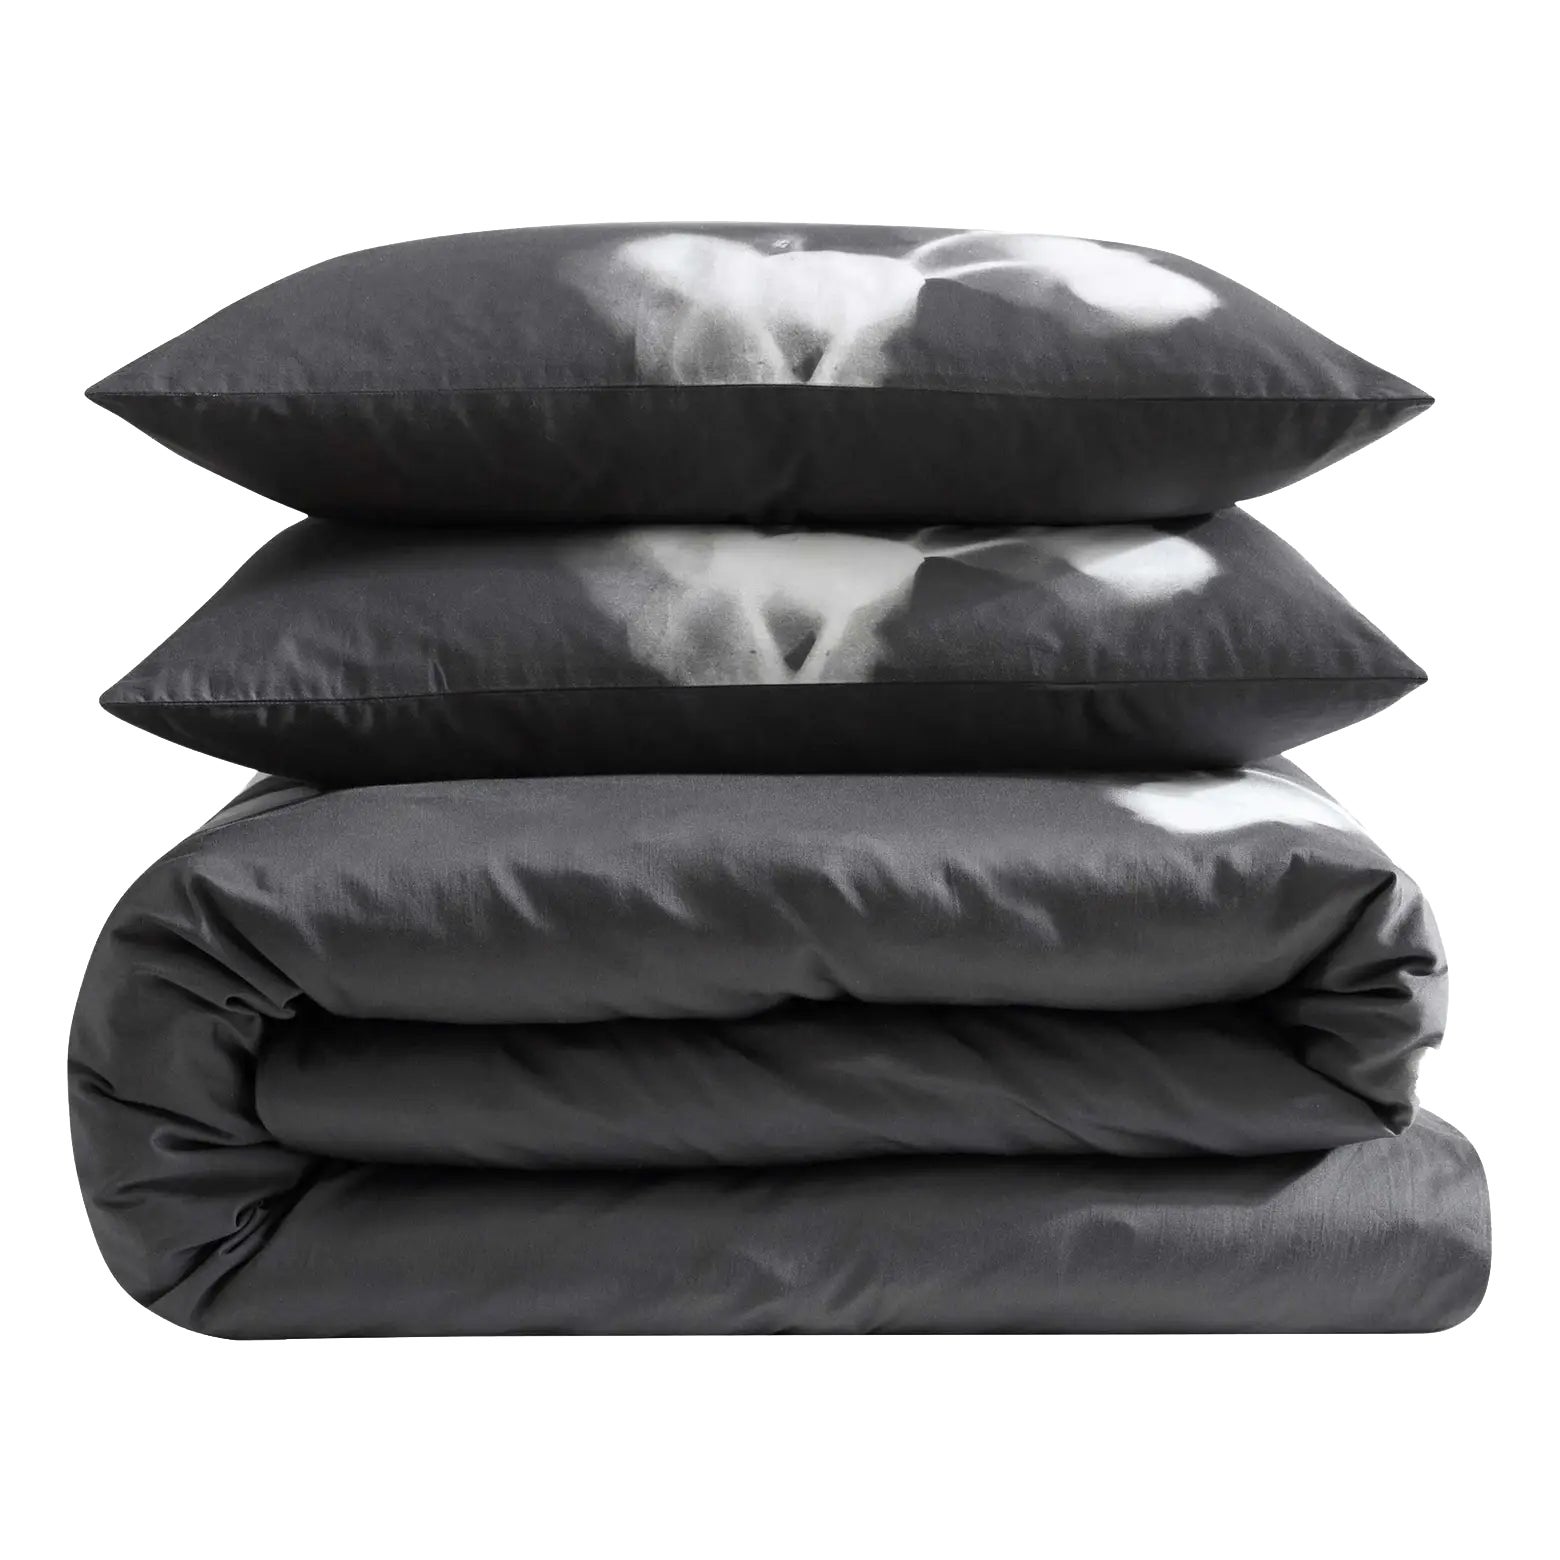 Product photo of a black and white duvet set.